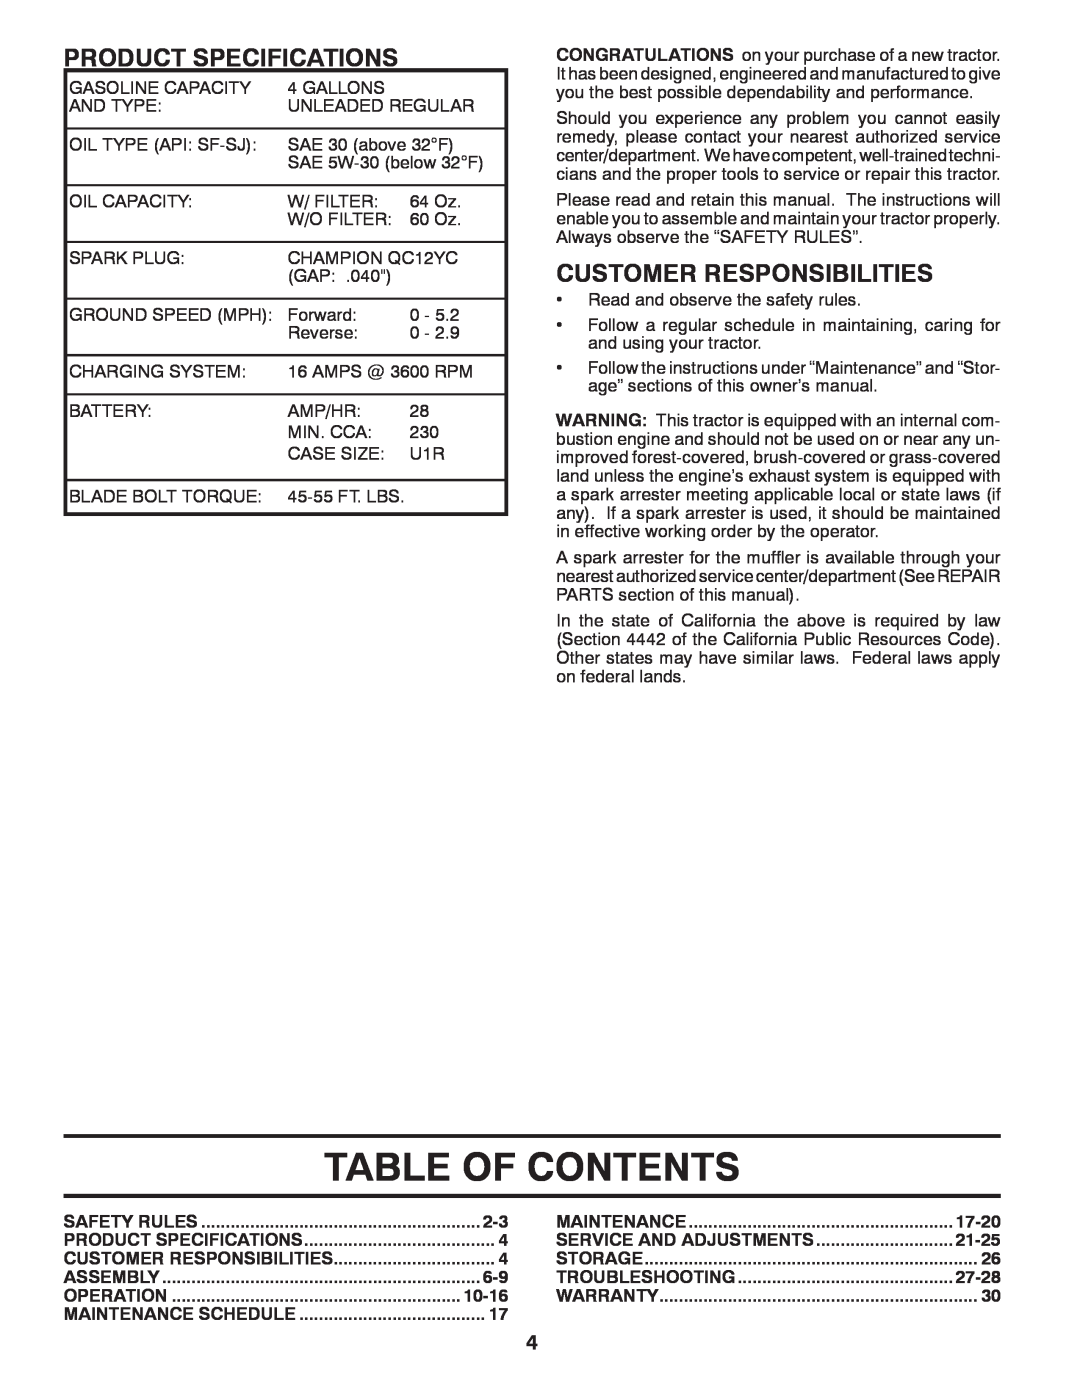 Poulan XT22H54 manual Table Of Contents, Product Specifications, Customer Responsibilities 